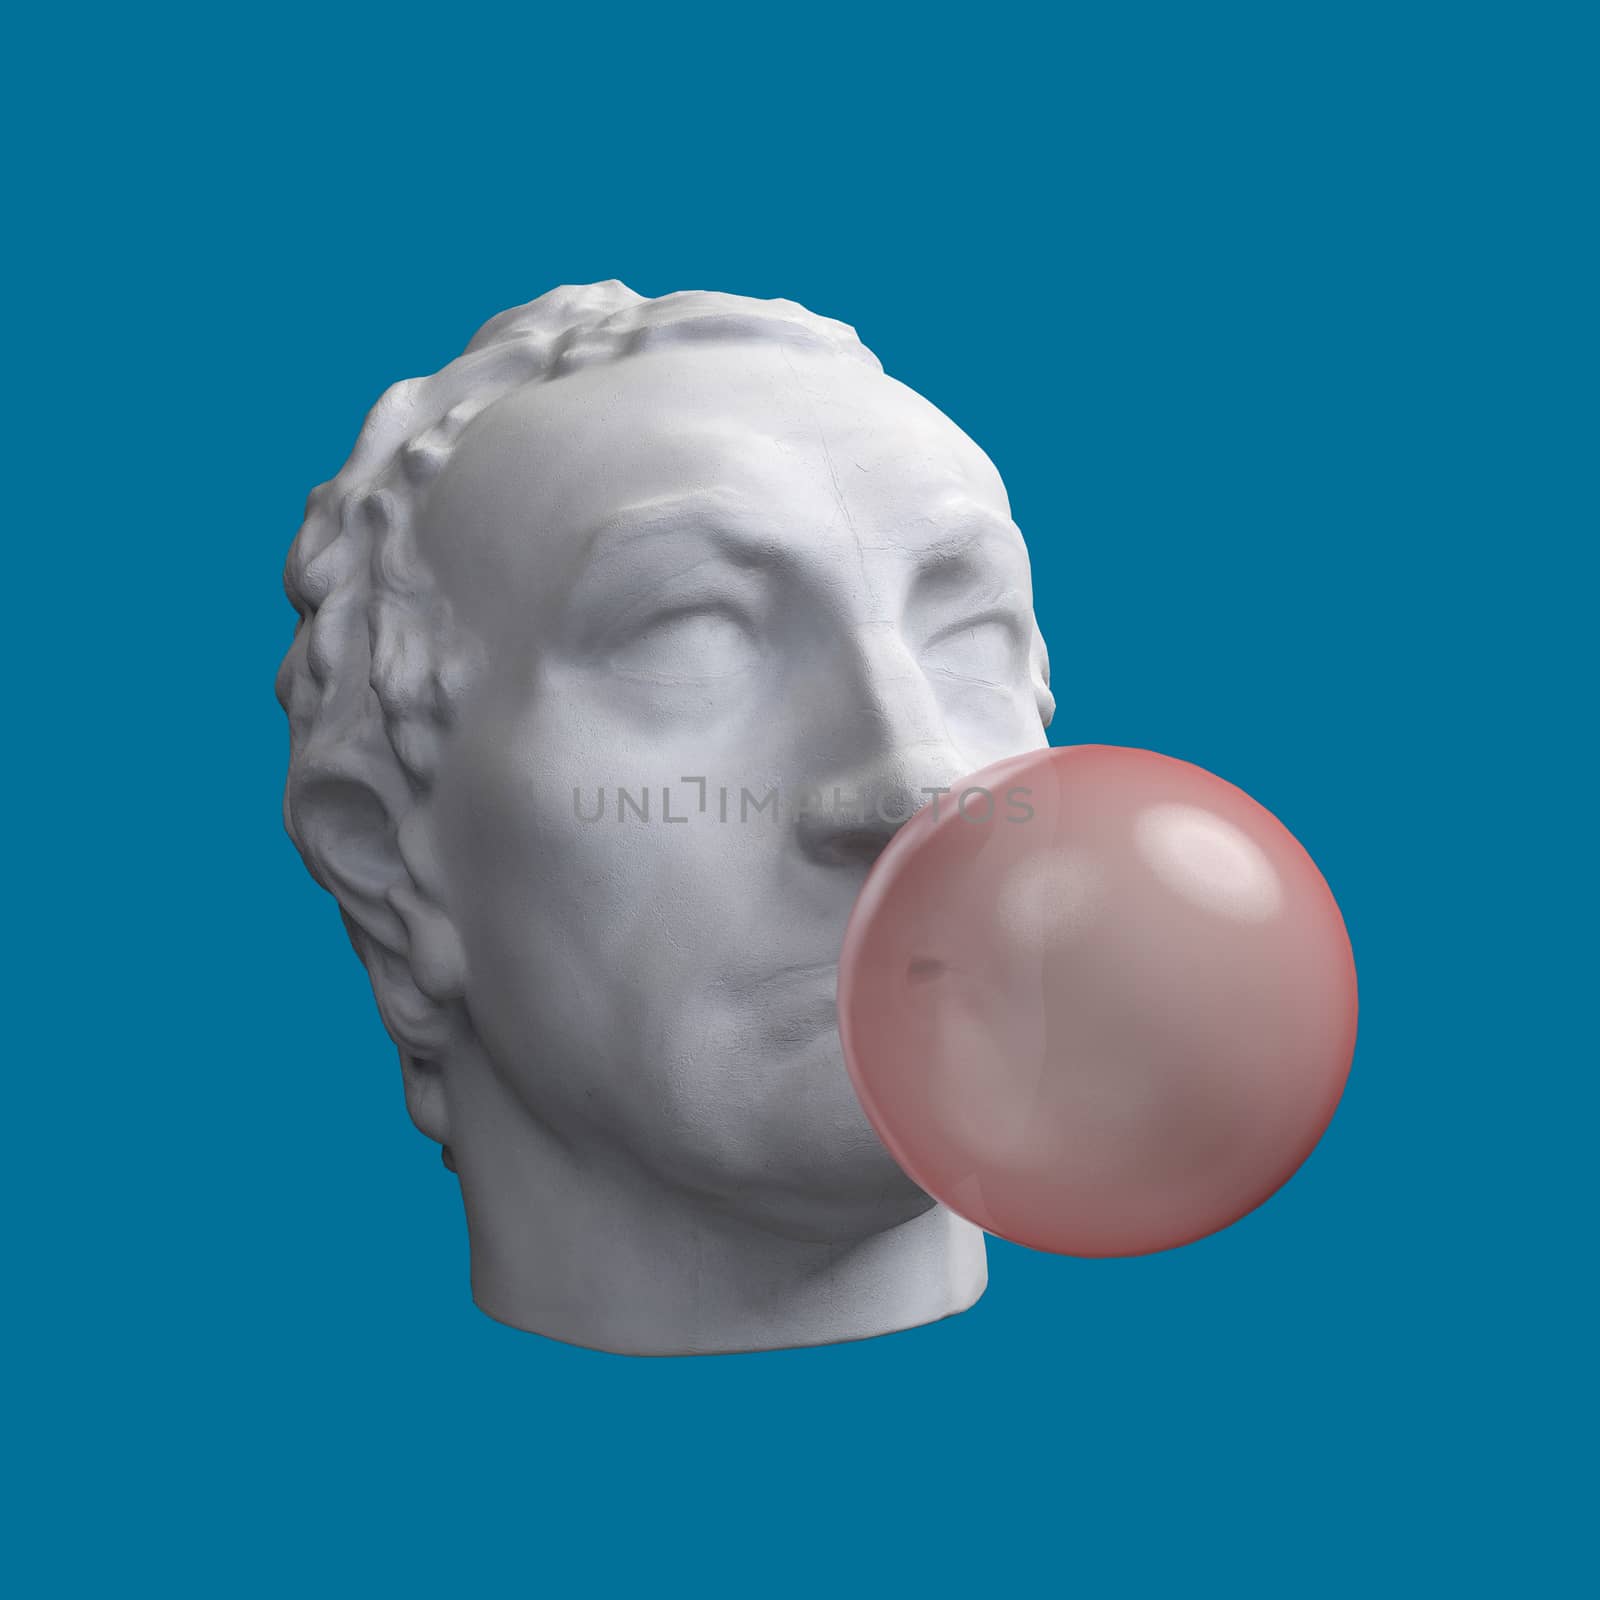 Funny illustration from 3d rendering of classical head sculpture blowing a pink chewing gum bubble. Isolated on blue background